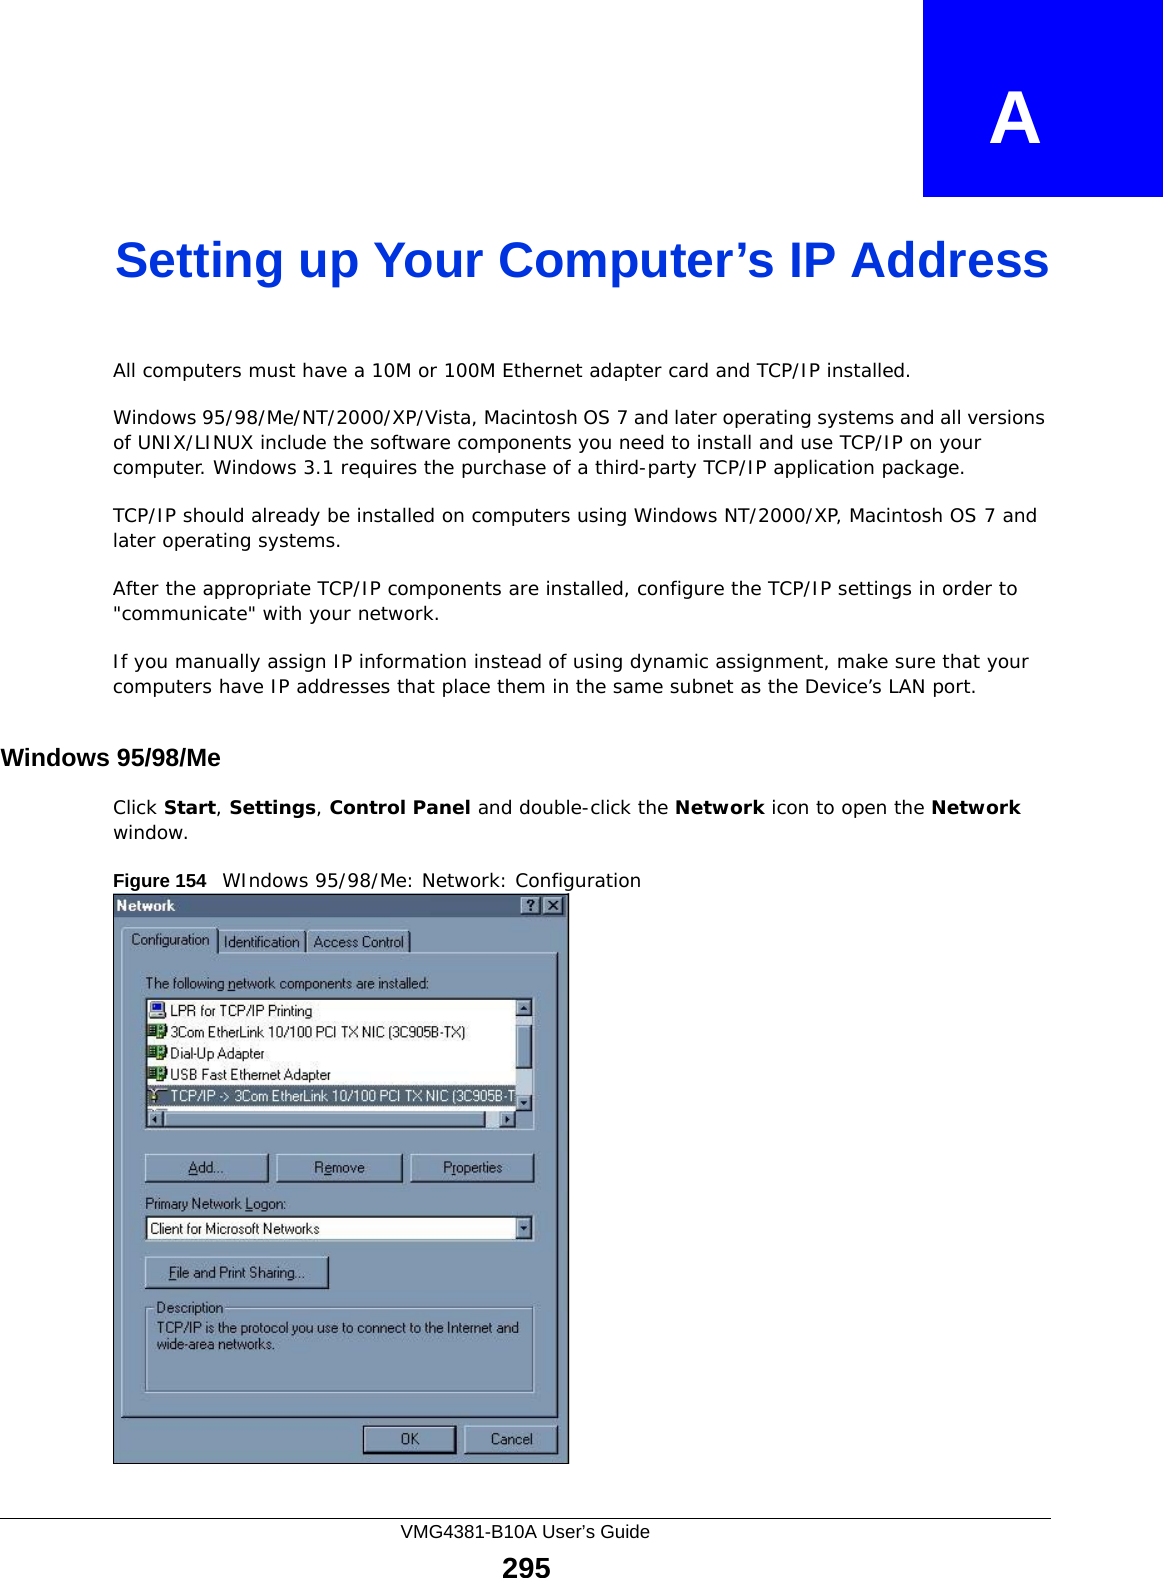 VMG4381-B10A User’s Guide295APPENDIX   ASetting up Your Computer’s IP AddressAll computers must have a 10M or 100M Ethernet adapter card and TCP/IP installed. Windows 95/98/Me/NT/2000/XP/Vista, Macintosh OS 7 and later operating systems and all versions of UNIX/LINUX include the software components you need to install and use TCP/IP on your computer. Windows 3.1 requires the purchase of a third-party TCP/IP application package.TCP/IP should already be installed on computers using Windows NT/2000/XP, Macintosh OS 7 and later operating systems.After the appropriate TCP/IP components are installed, configure the TCP/IP settings in order to &quot;communicate&quot; with your network. If you manually assign IP information instead of using dynamic assignment, make sure that your computers have IP addresses that place them in the same subnet as the Device’s LAN port.Windows 95/98/MeClick Start, Settings, Control Panel and double-click the Network icon to open the Network window.Figure 154   WIndows 95/98/Me: Network: Configuration